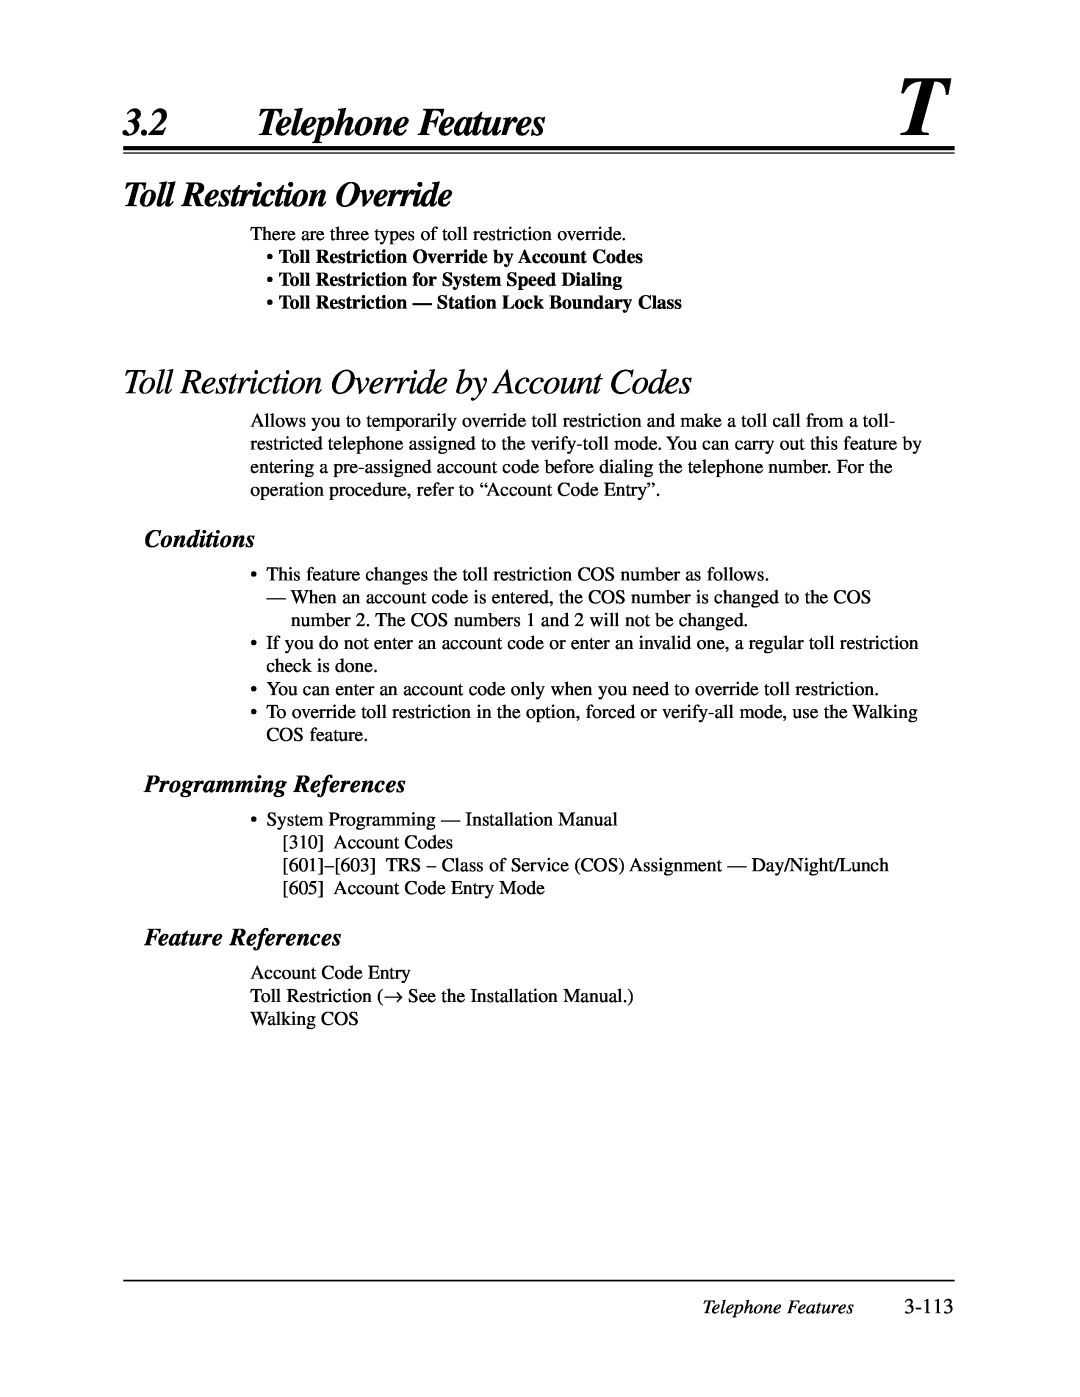 Panasonic KX-TA624 user manual Toll Restriction Override by Account Codes, 3-113, Telephone Features, Conditions 